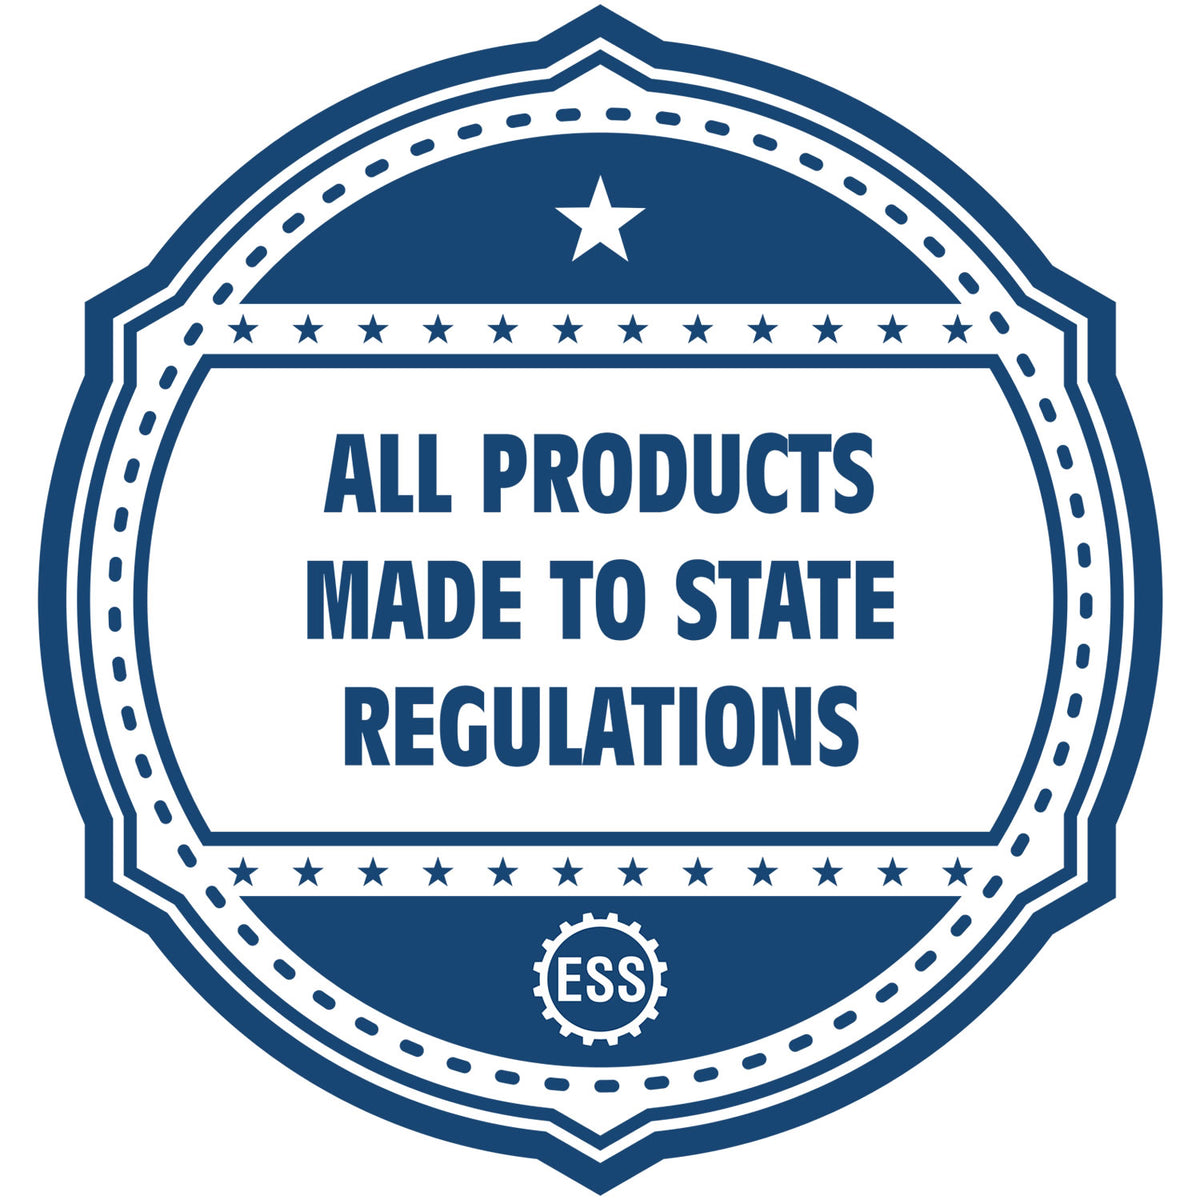 An icon or badge element for the Indiana Professional Engineer Seal Stamp showing that this product is made in compliance with state regulations.